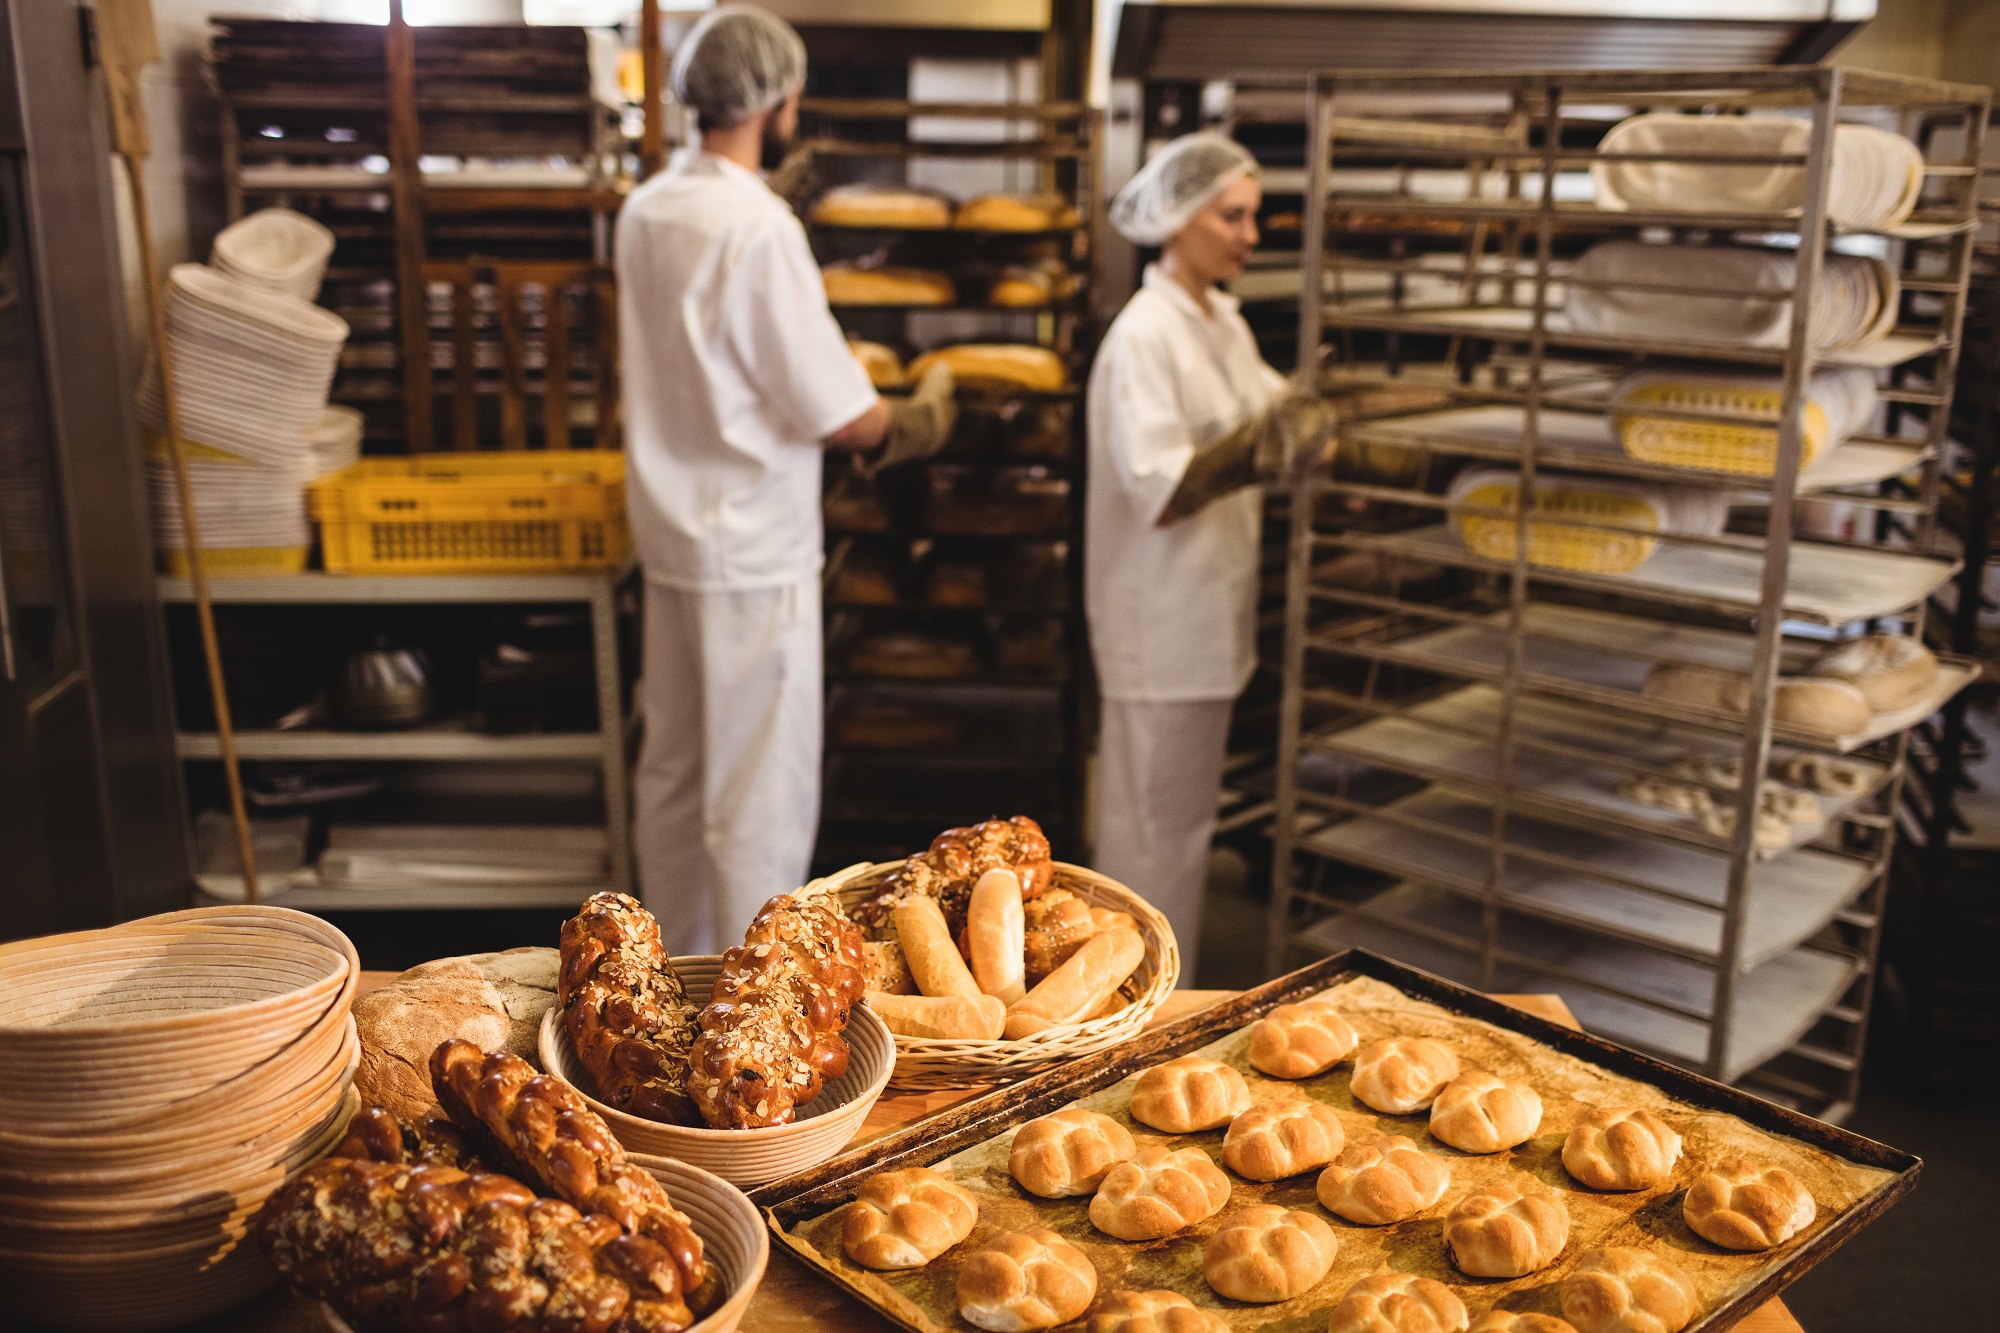 Linwoods loses 70 employees as baking production ends